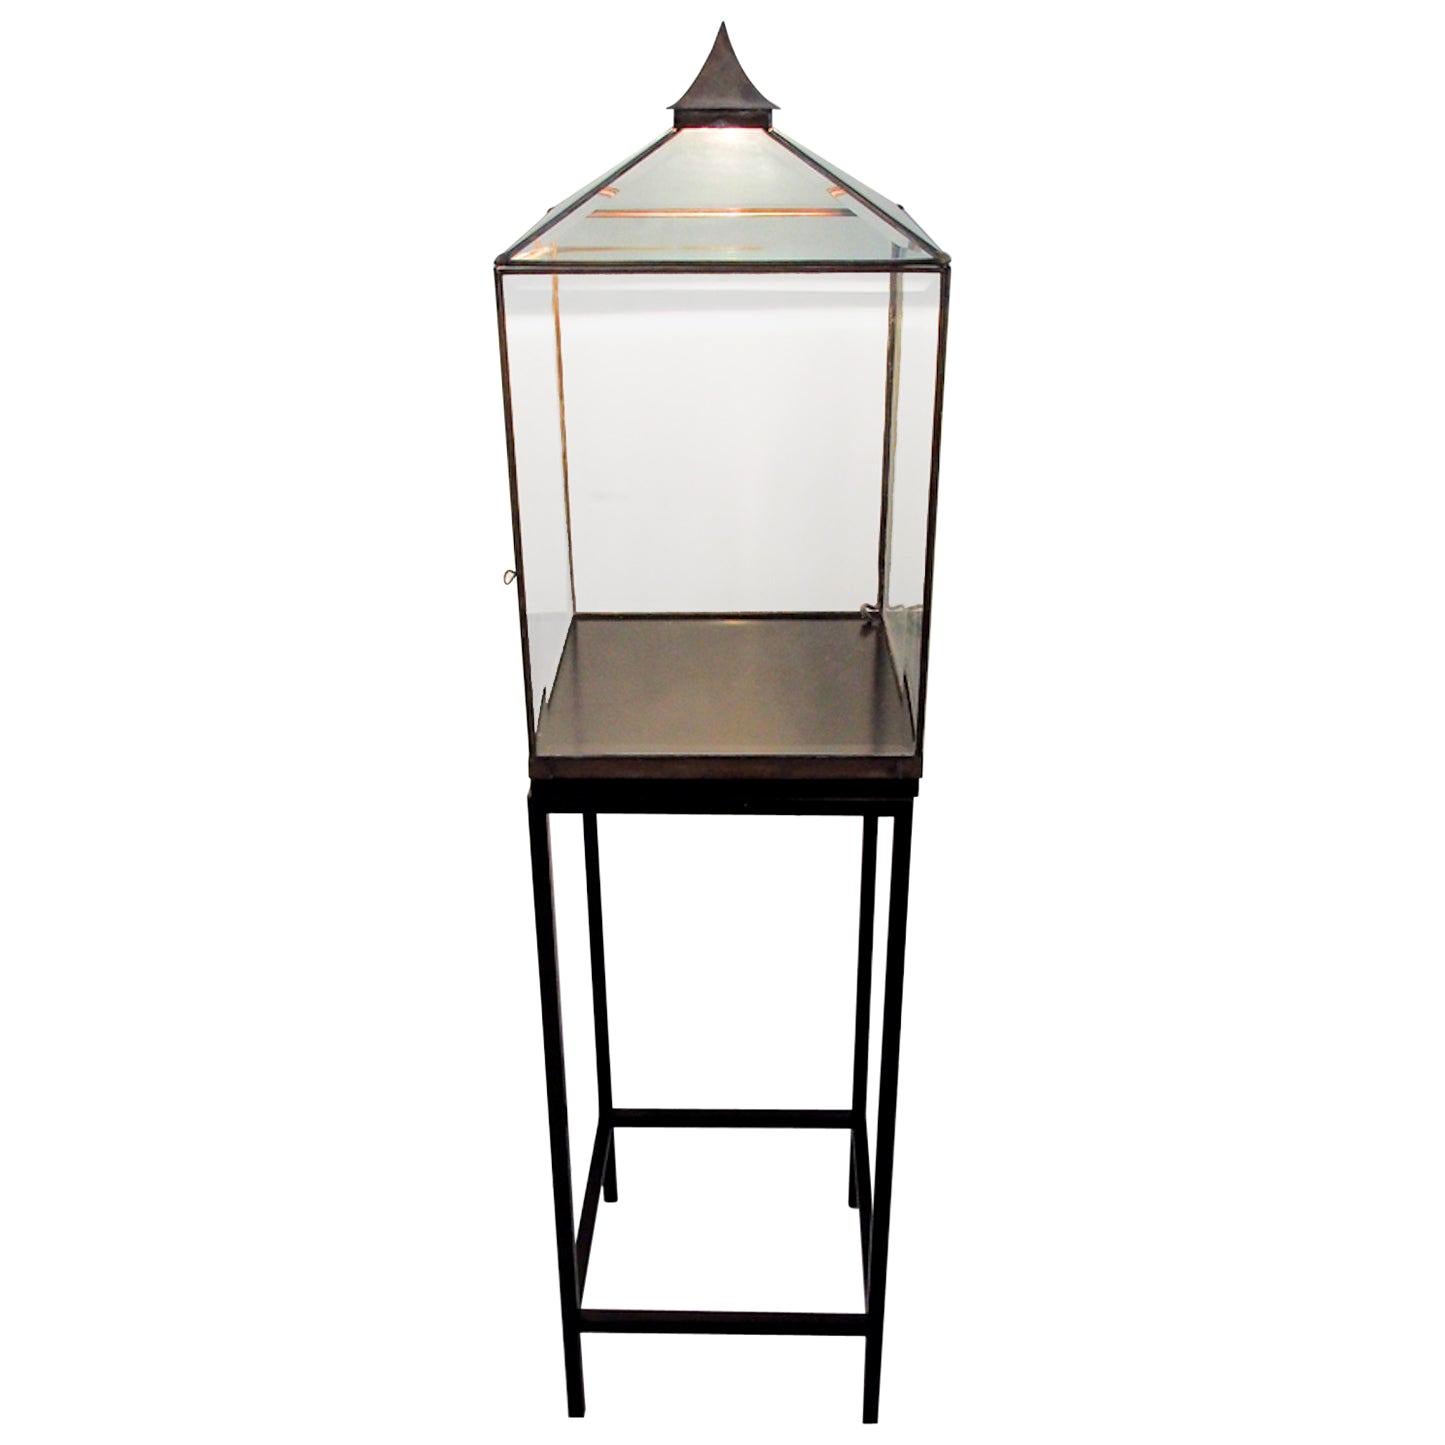 Glass and Oxidized Metal Floor Light with Display Case